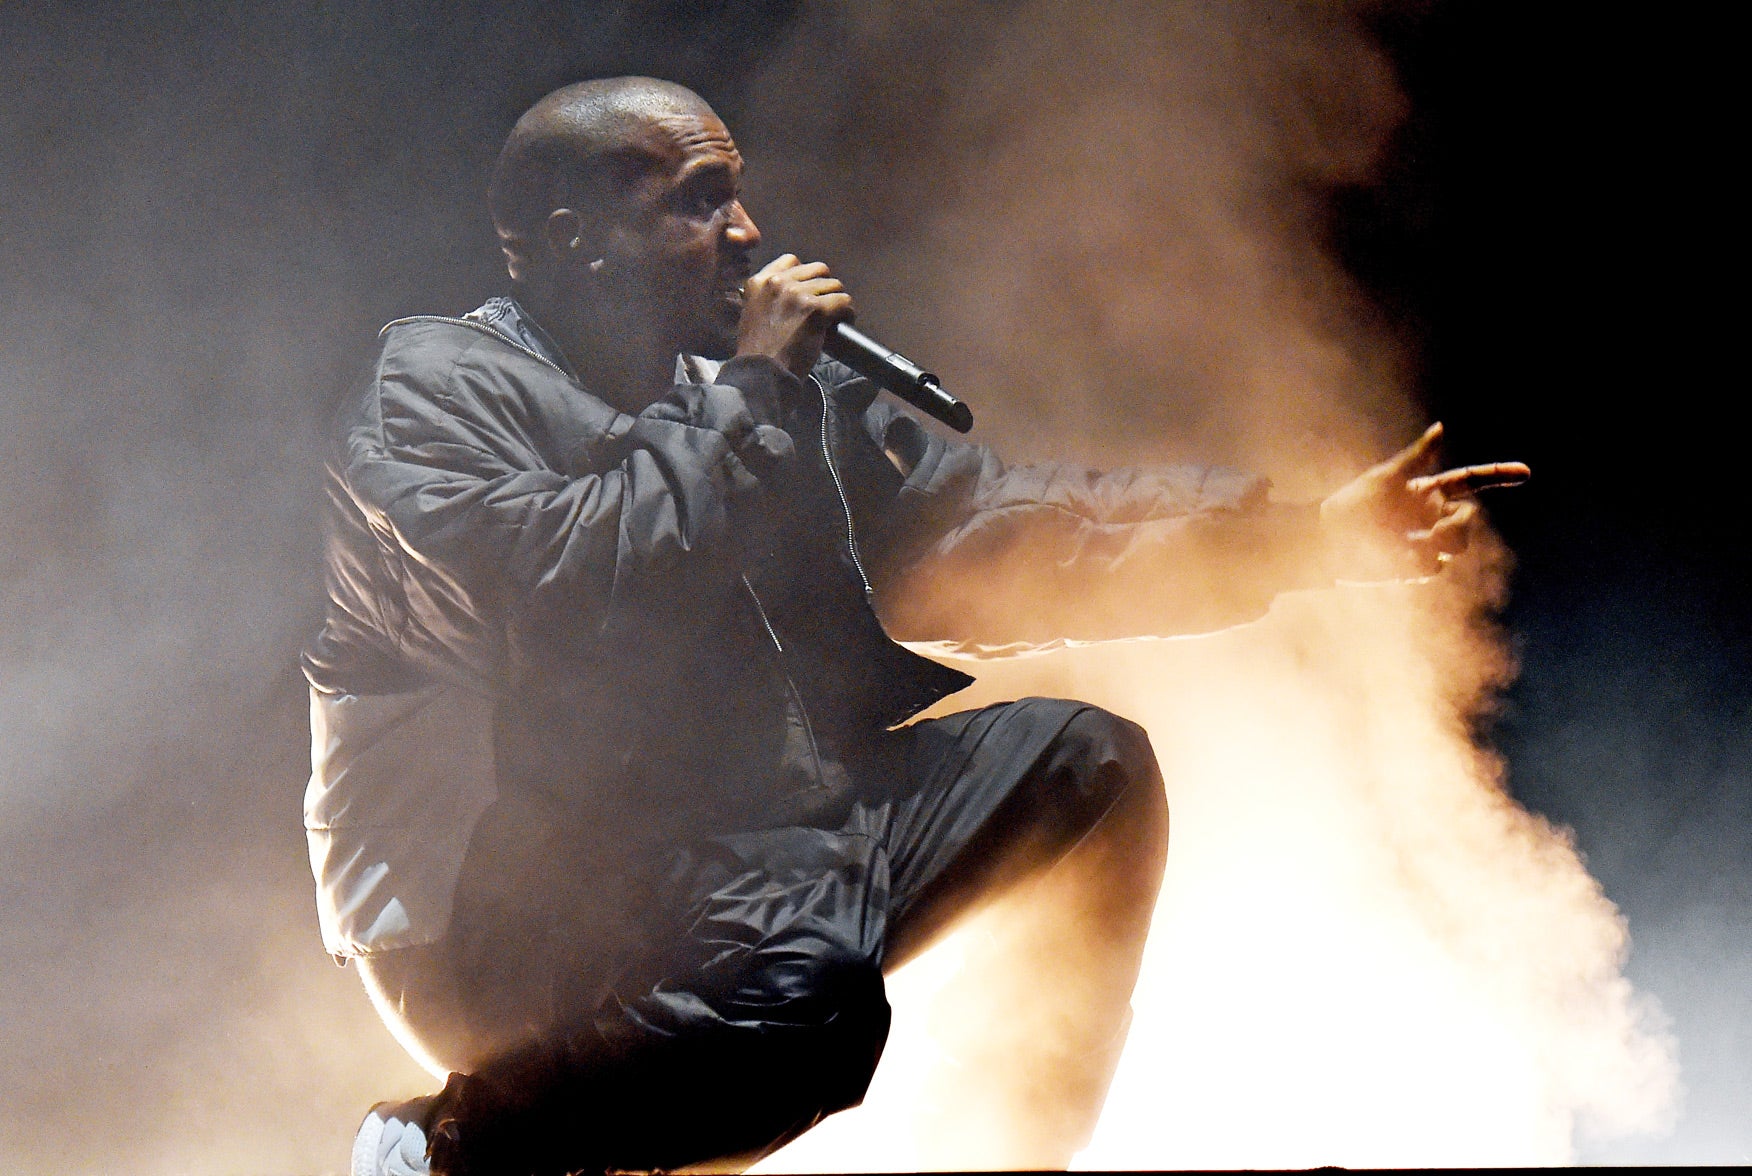 Kanye West to be Honored at VMAs, Award Show Performers Announced
